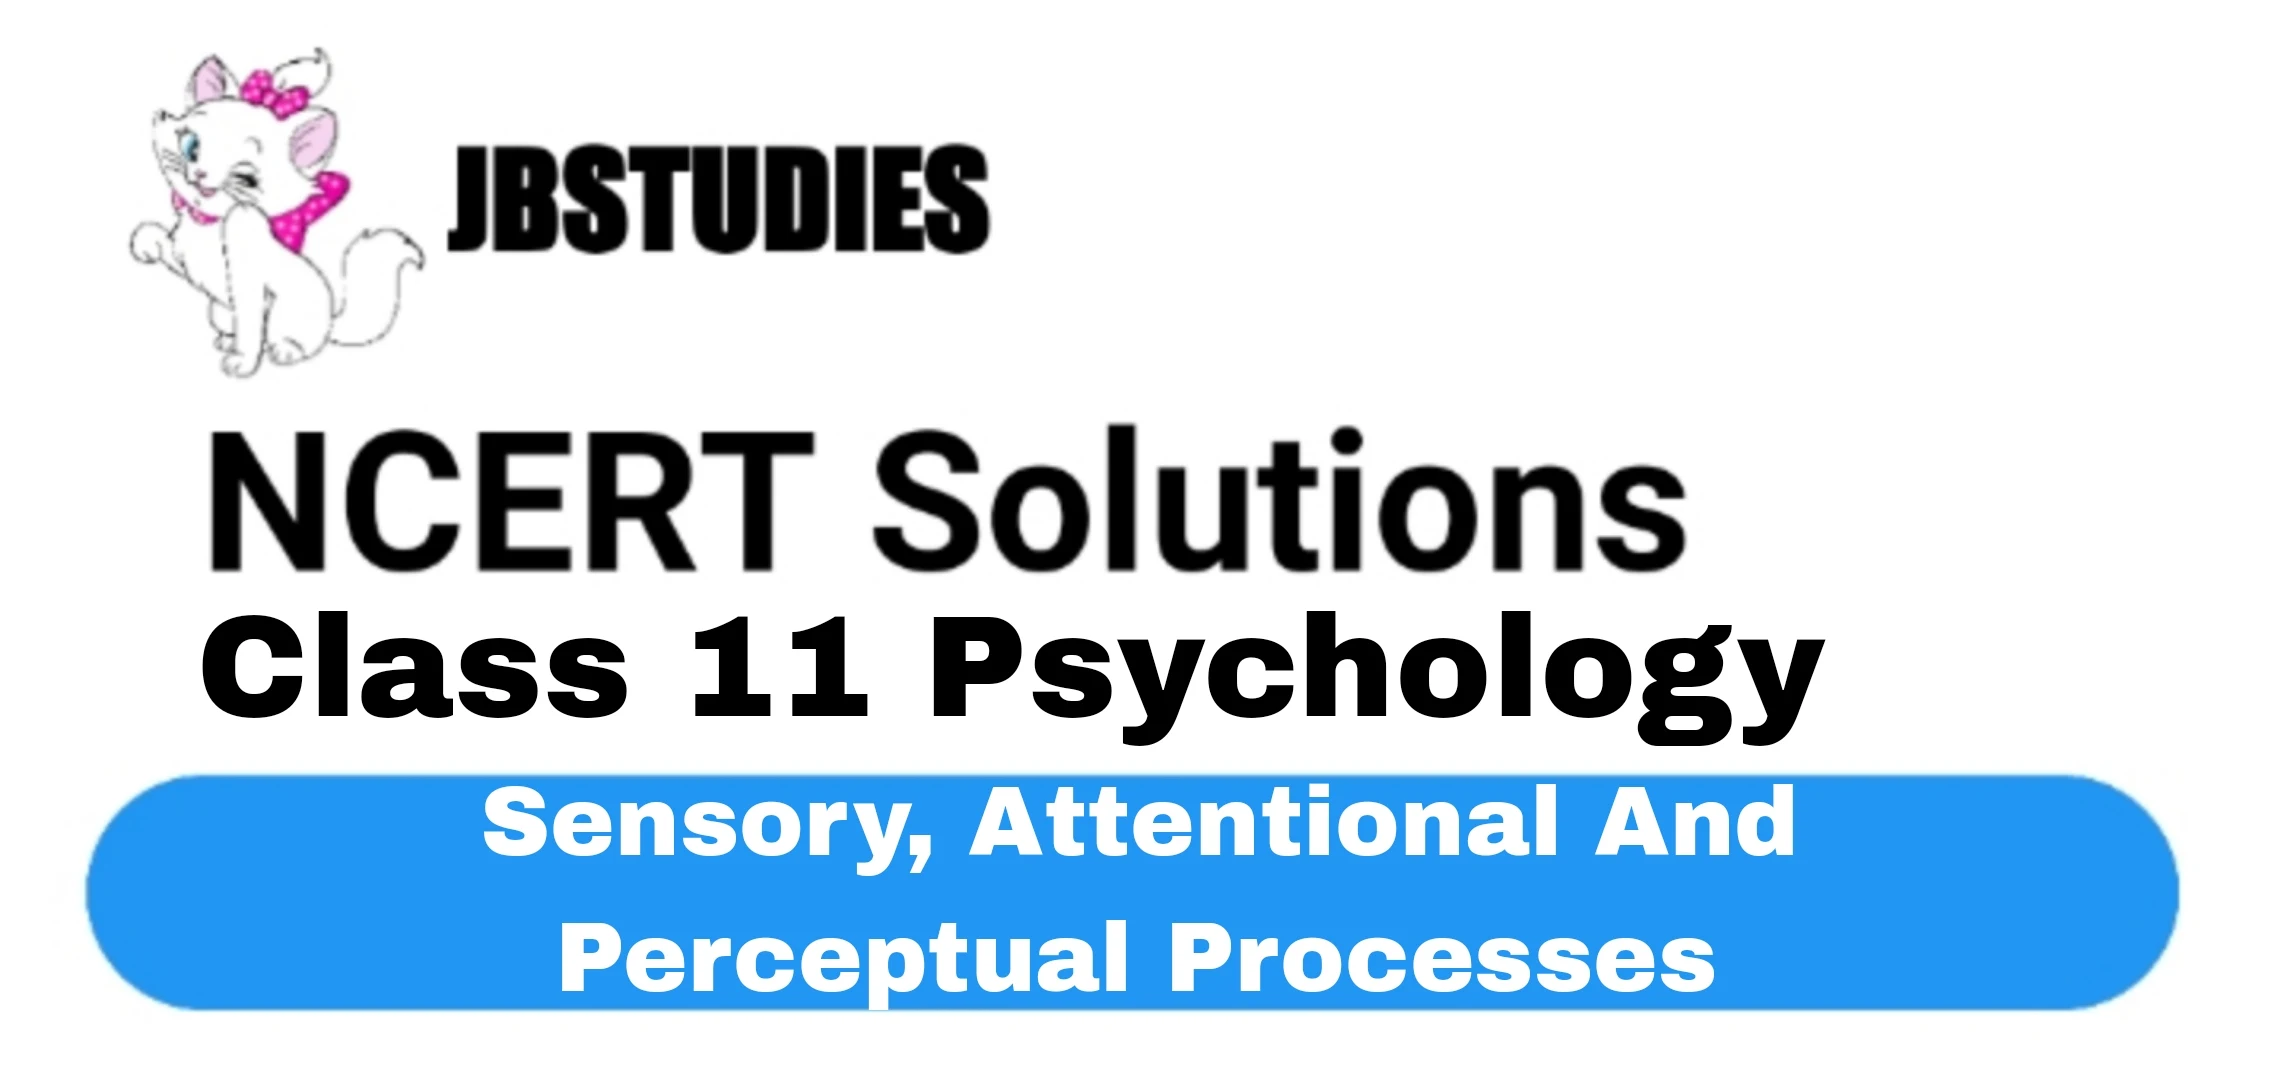 Solutions Class 11 Psychology Chapter -5 (Sensory, Attentional And Perceptual Processes)